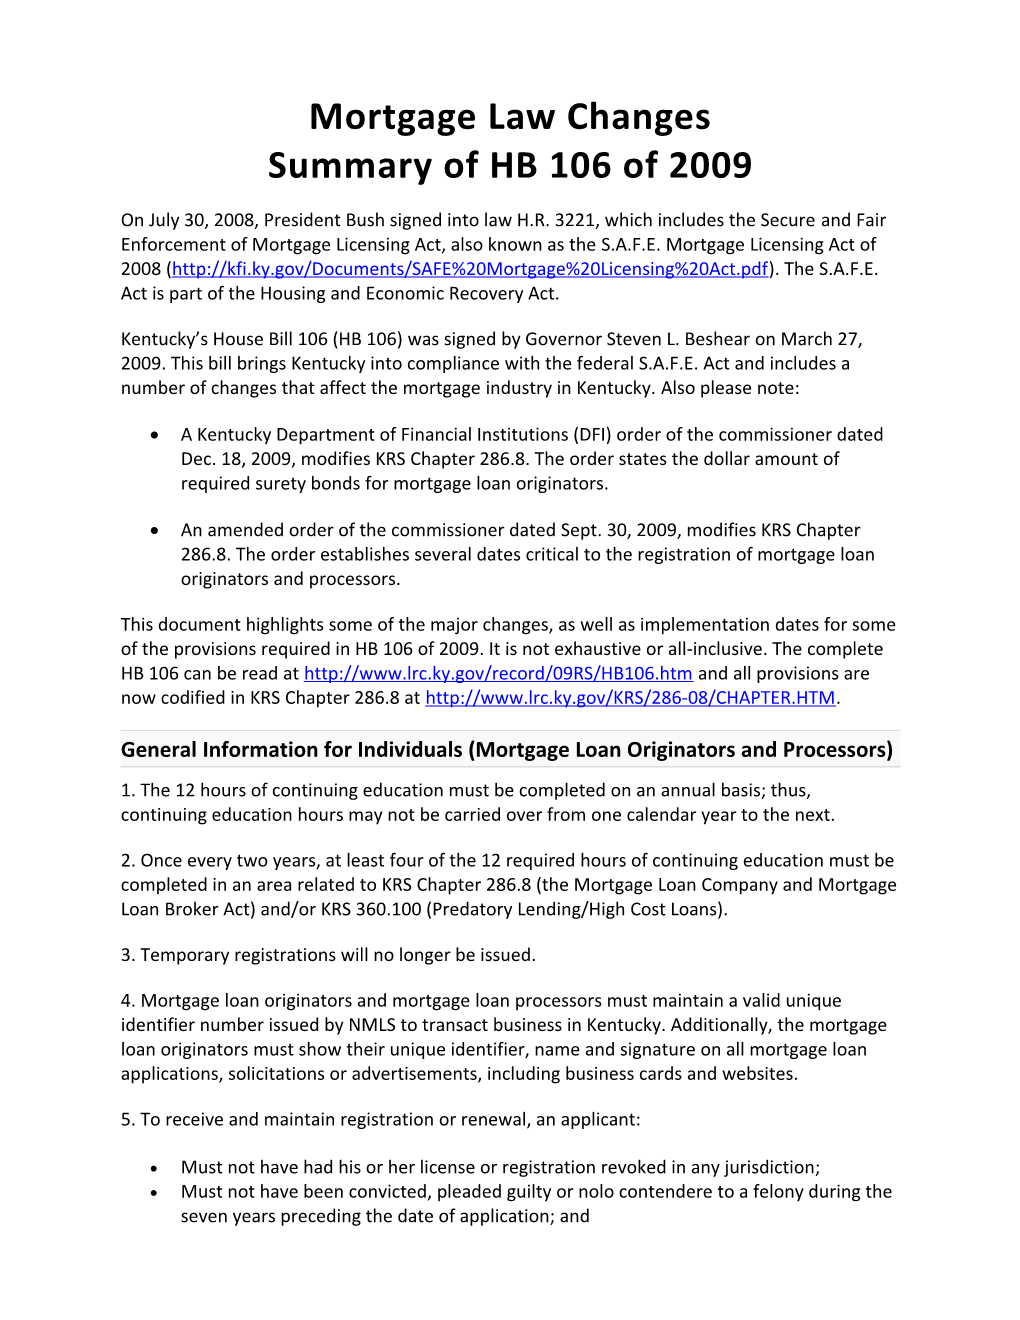 Mortgage Law Changes - HB 106 of 2009